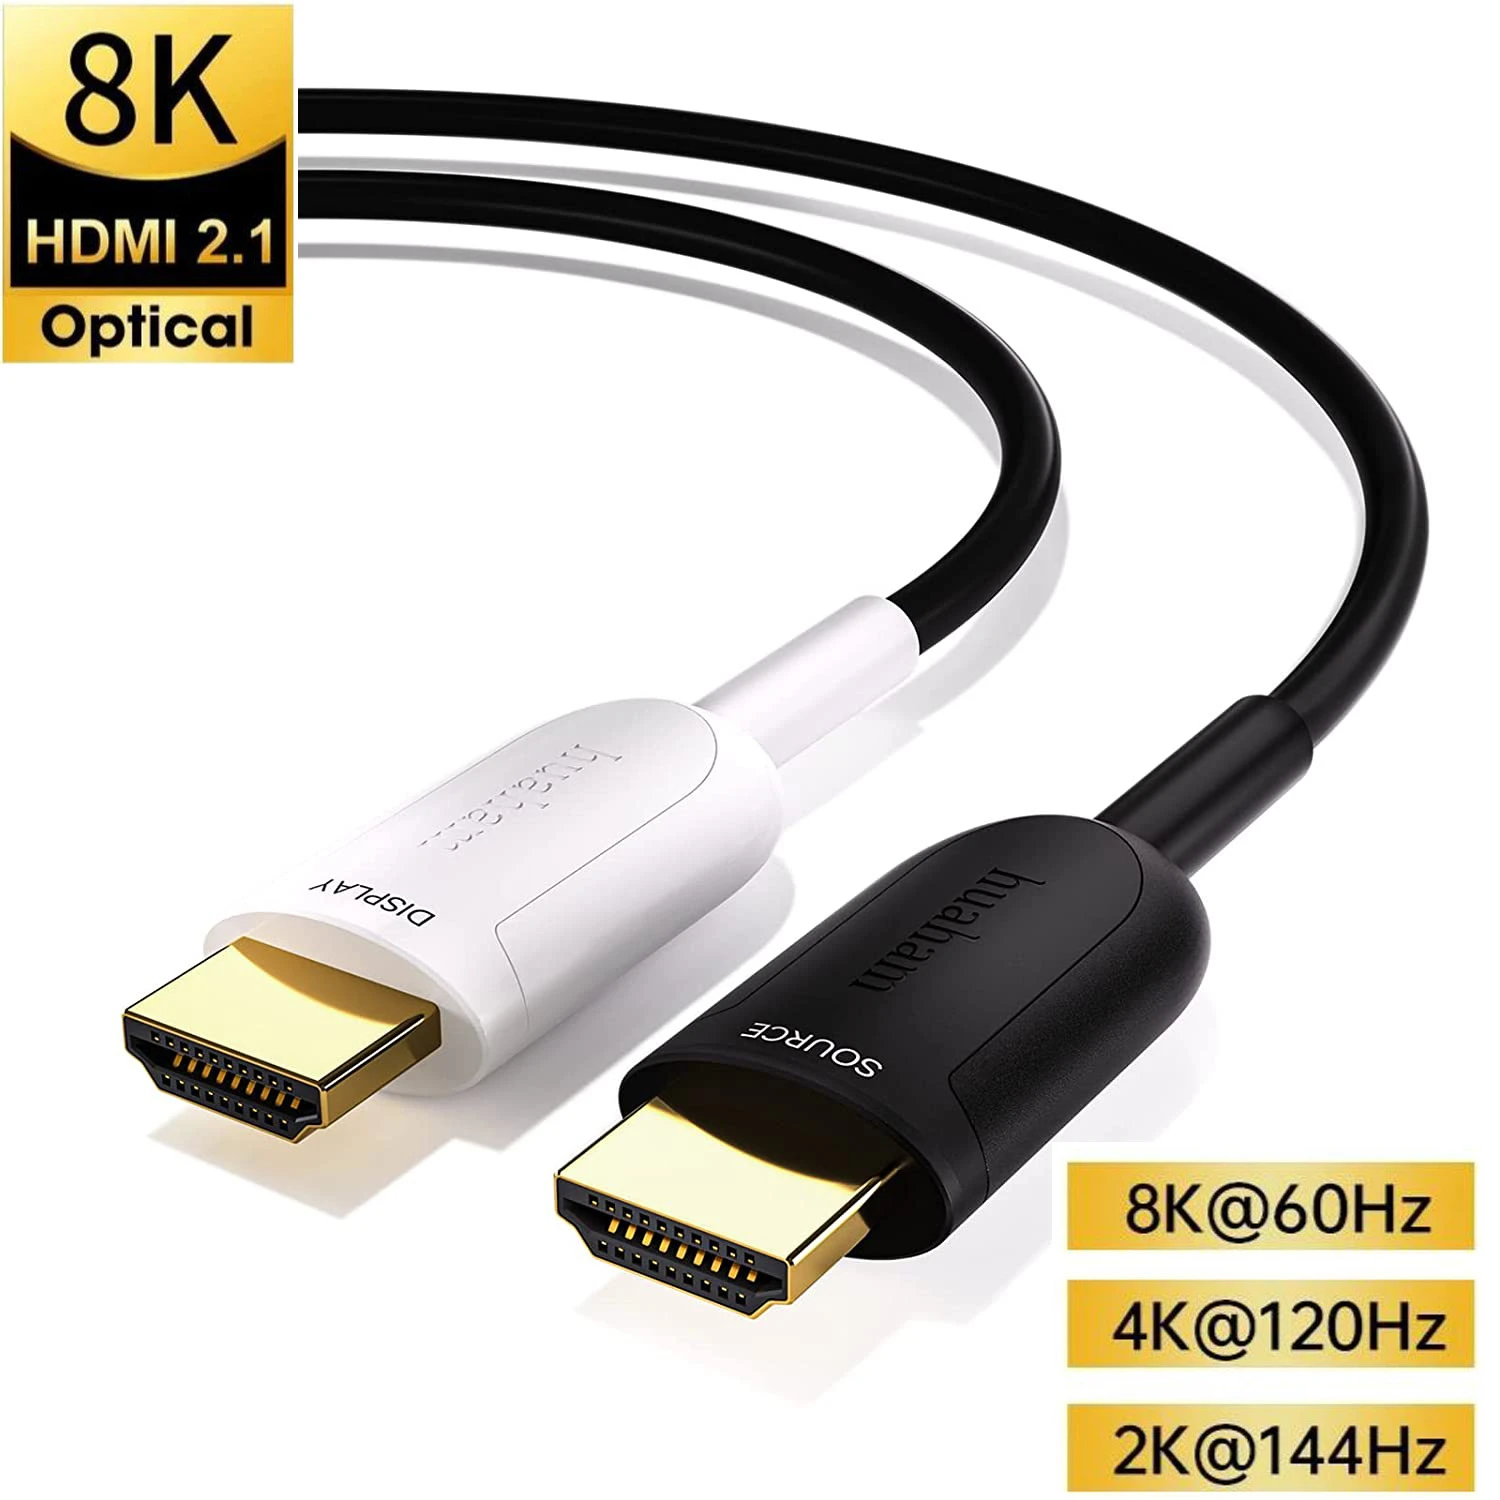 Sommetider uren gøre ondt Ultra High Speed Hdmi Cable Xbox | Hdmi Cable Dolby Vision | Fiber 2.1 Hdmi  Cable Xbox - Audio & Video Cables - Aliexpress